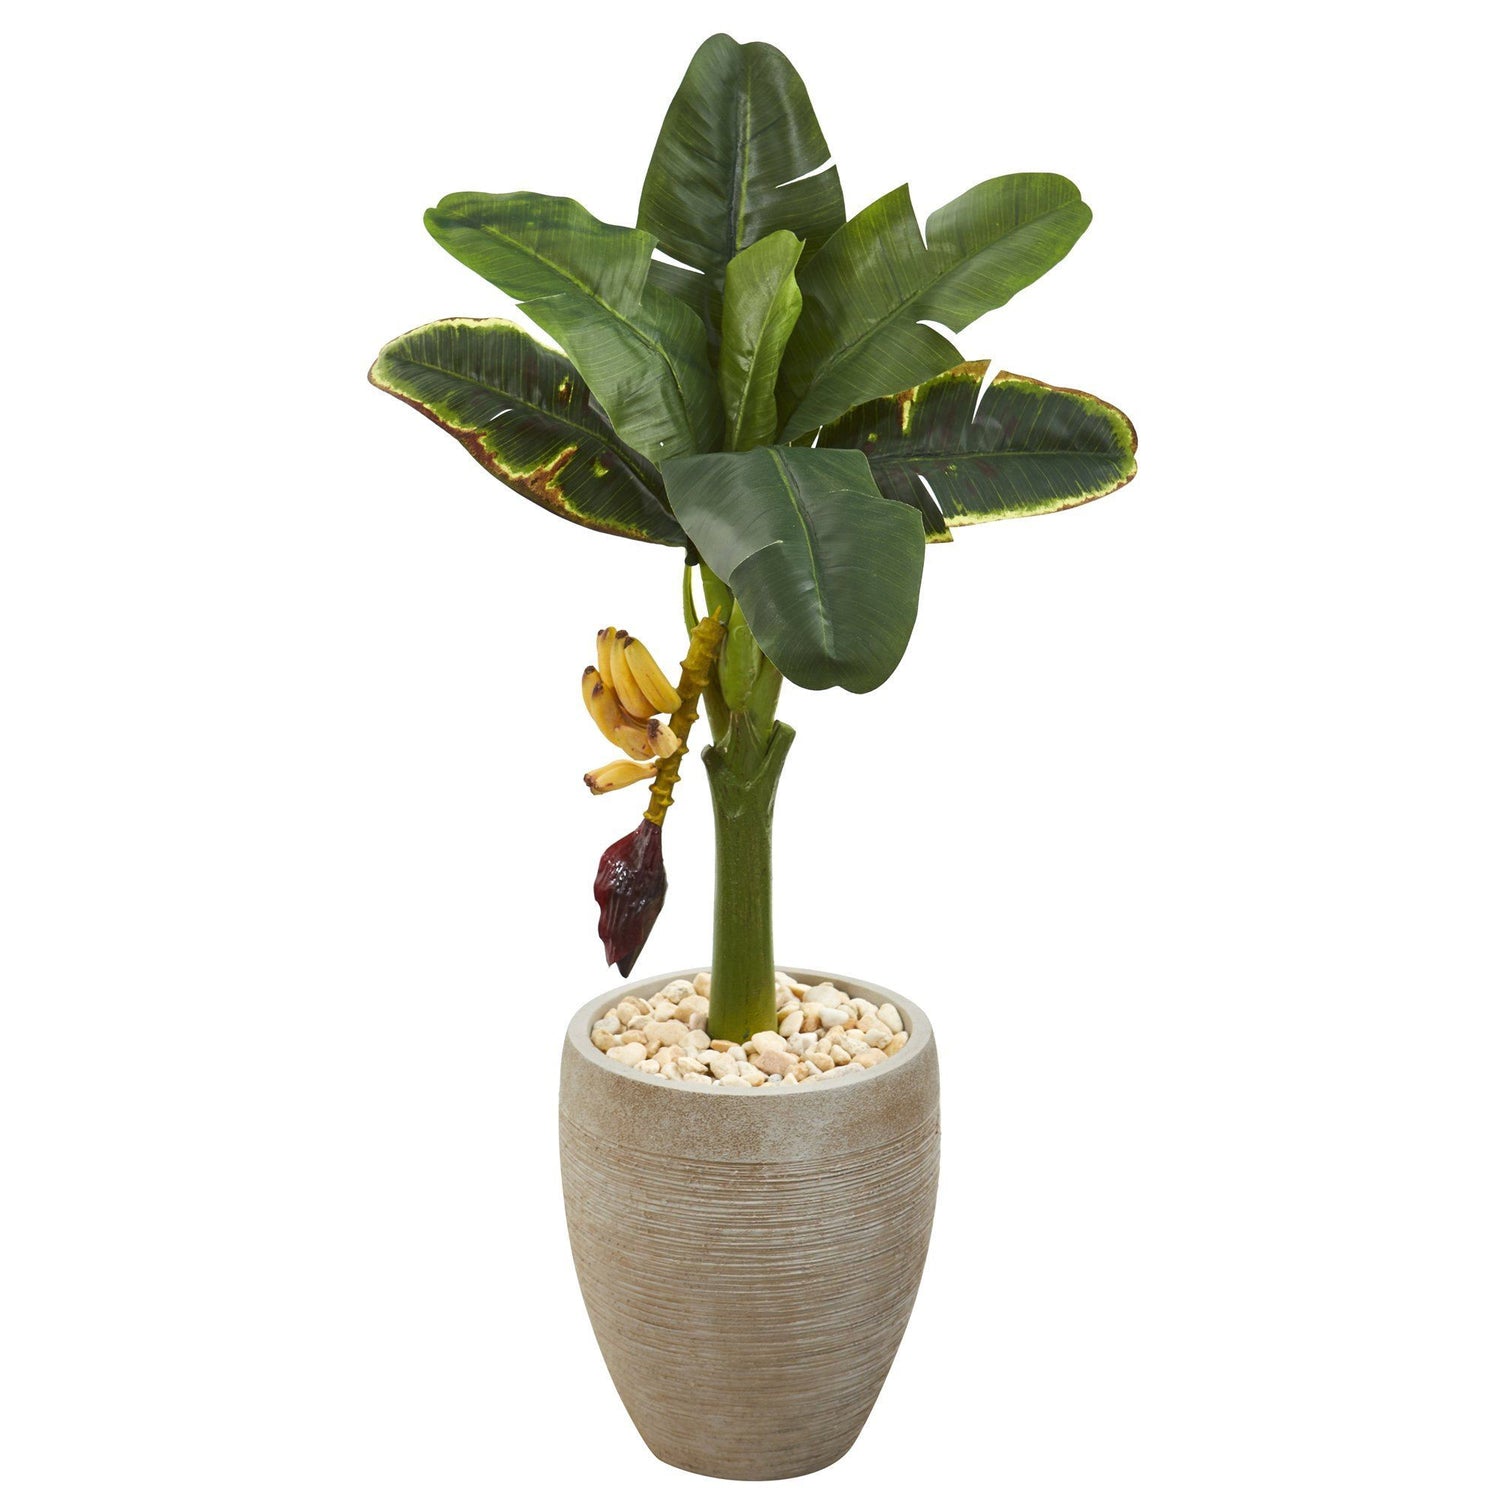 36” Banana Artificial Tree in Sand Colored Planter